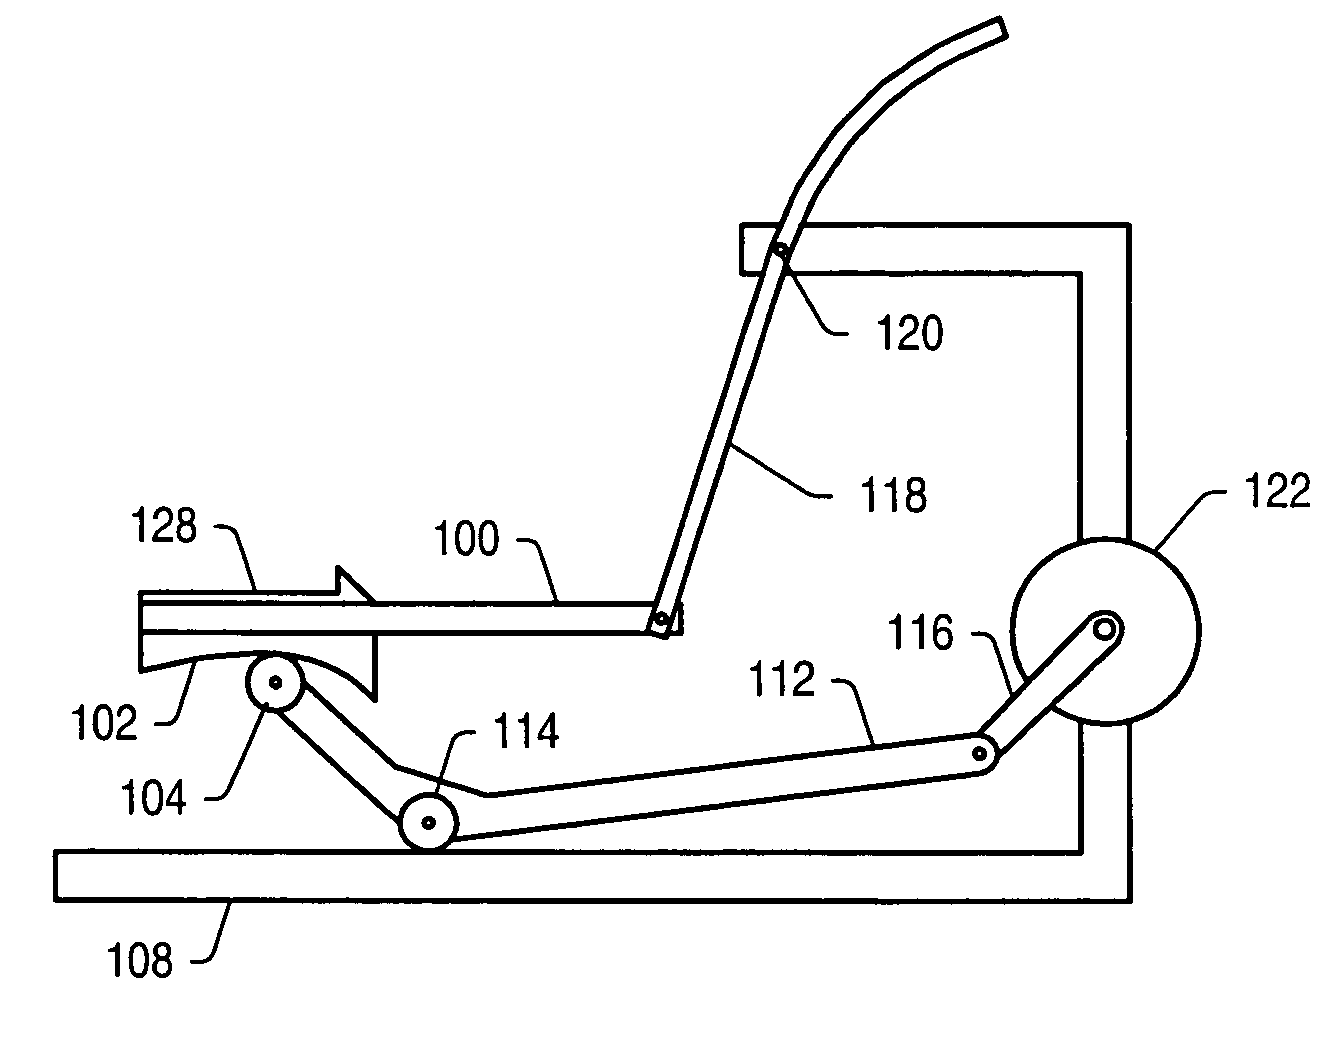 Exercise apparatus that allows user varied stride length